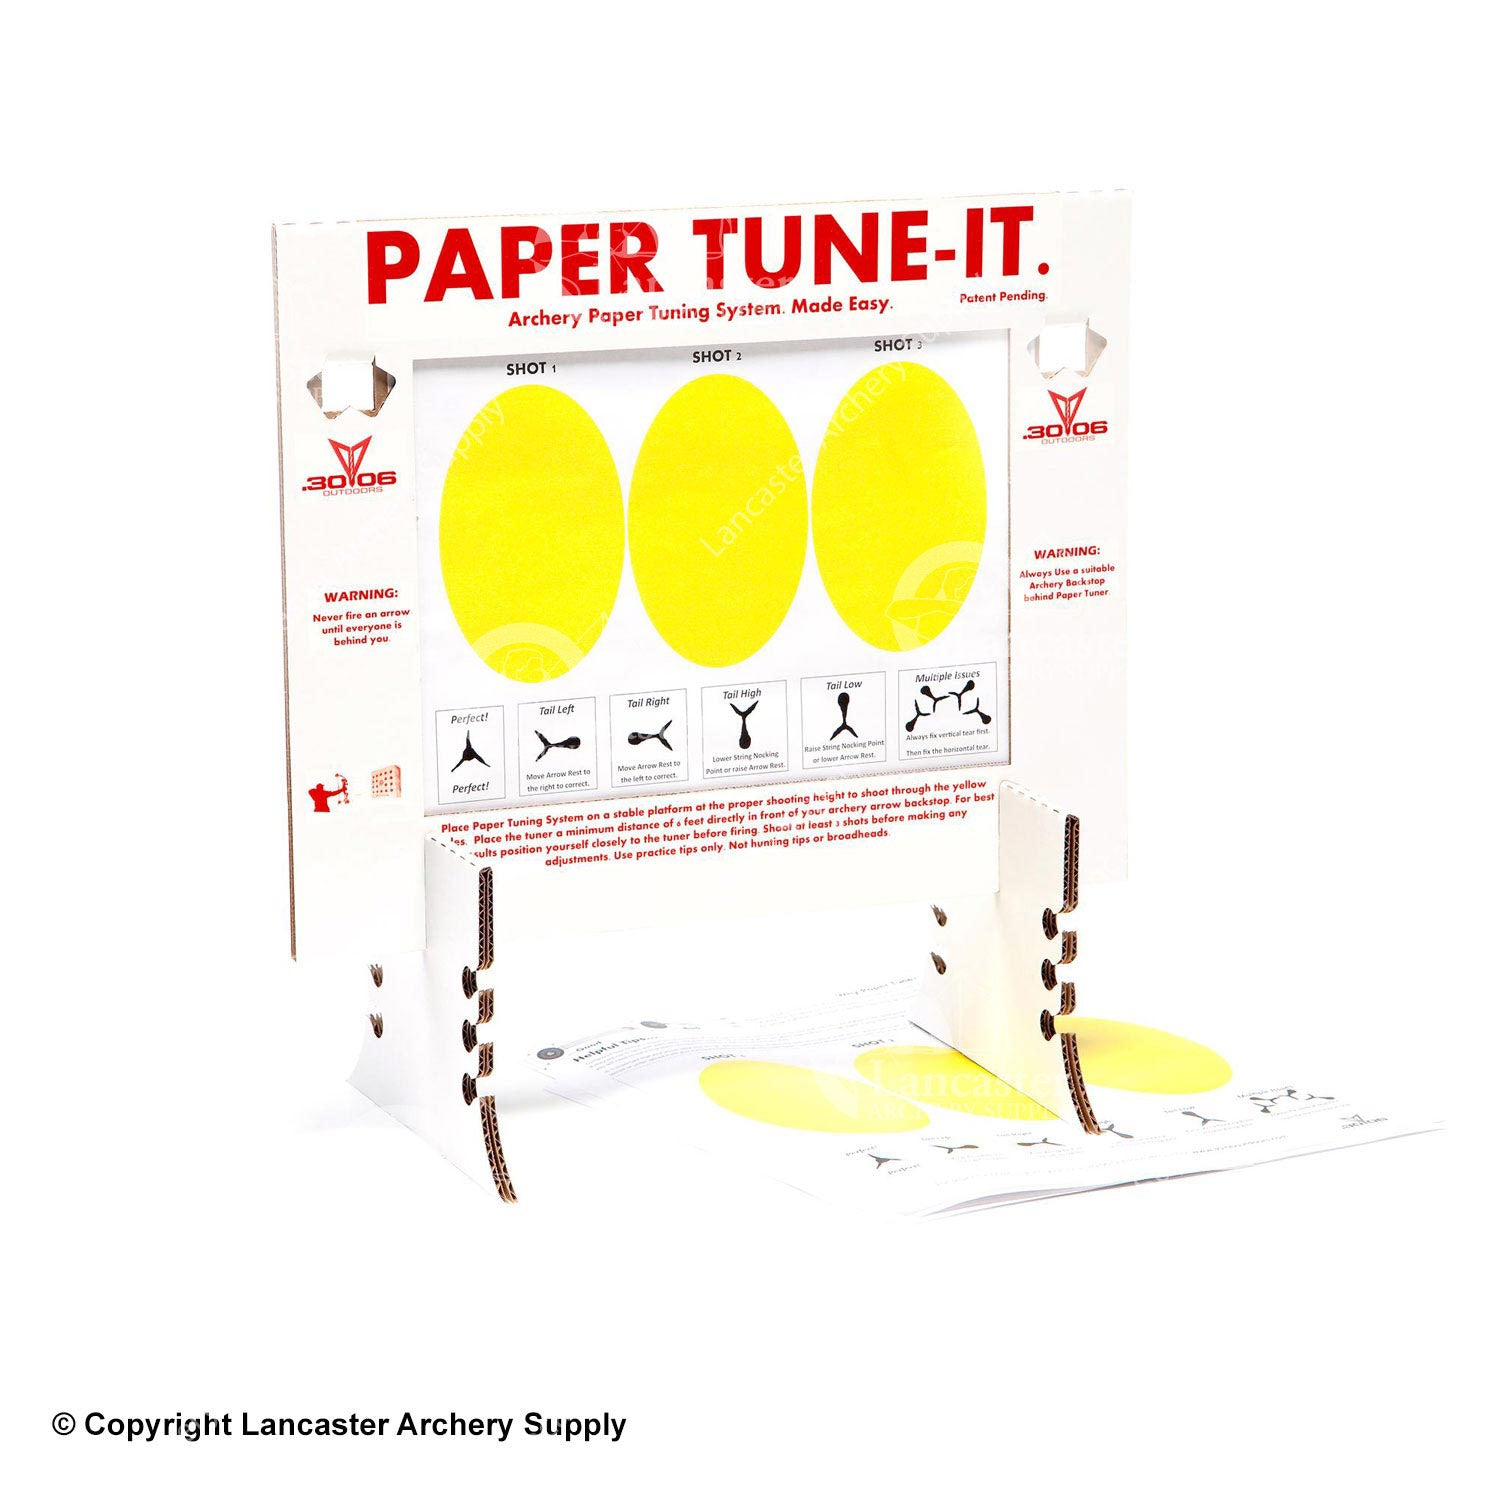 A cardboard paper tuner that has two stands and holder for the tuning paper. The tuning paper has three yellow ovals for shot tuning.